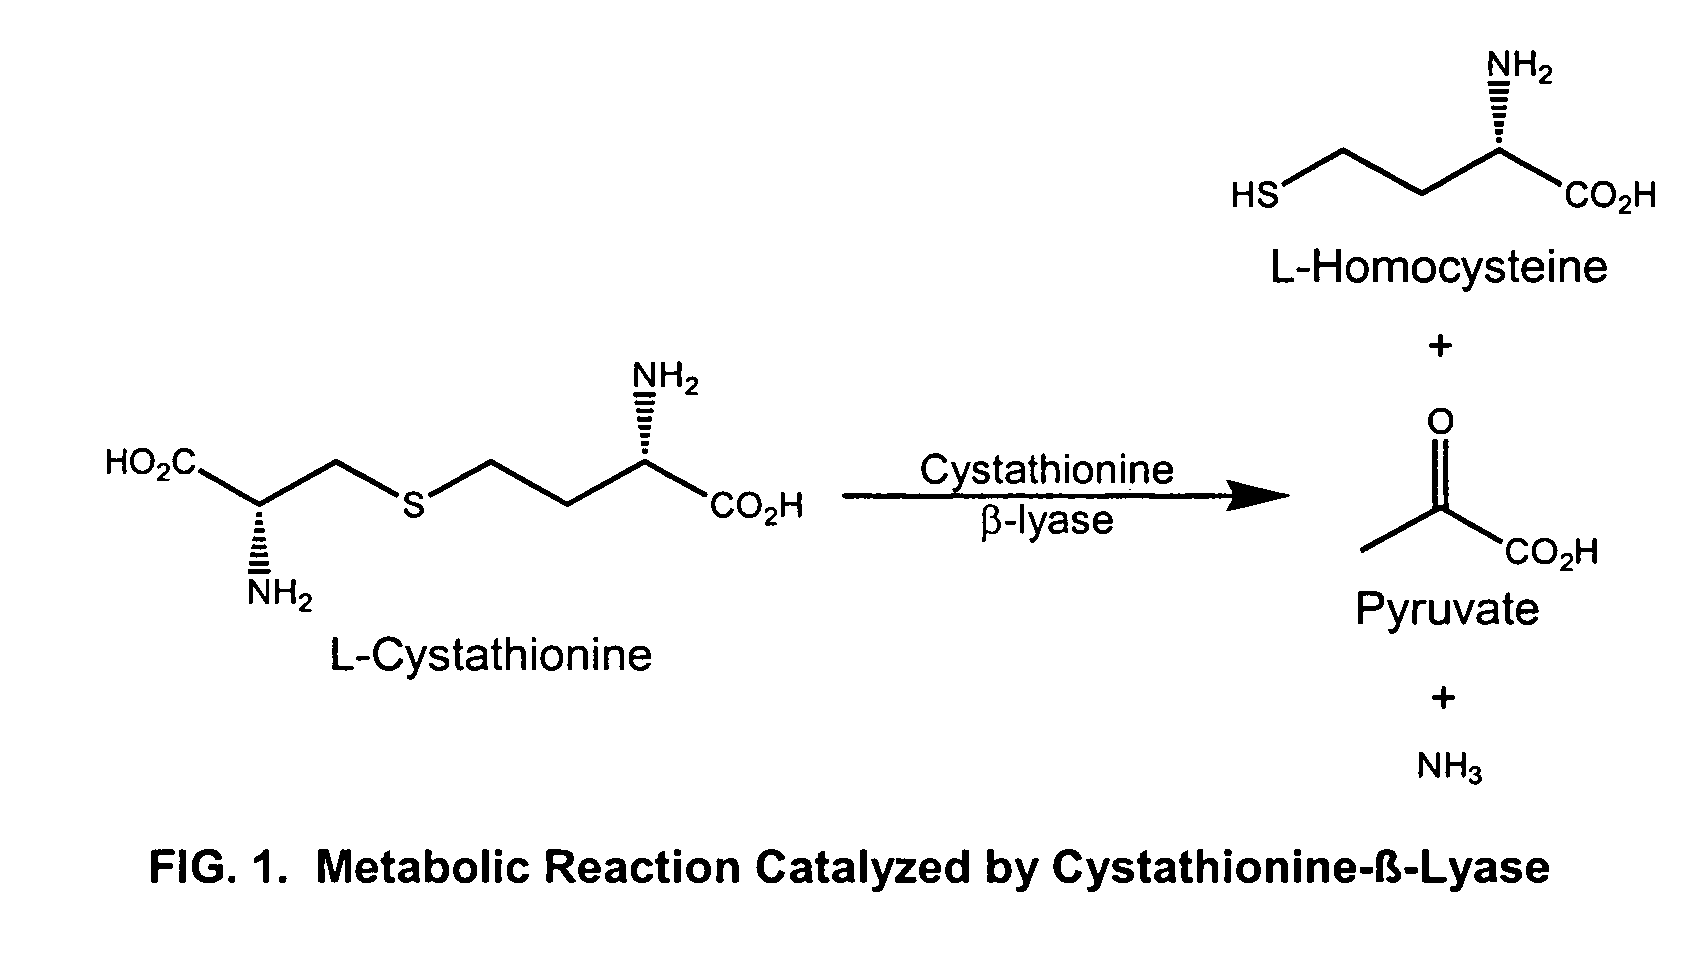 Methods for dissolving cystine stones and reducing cystine in urine